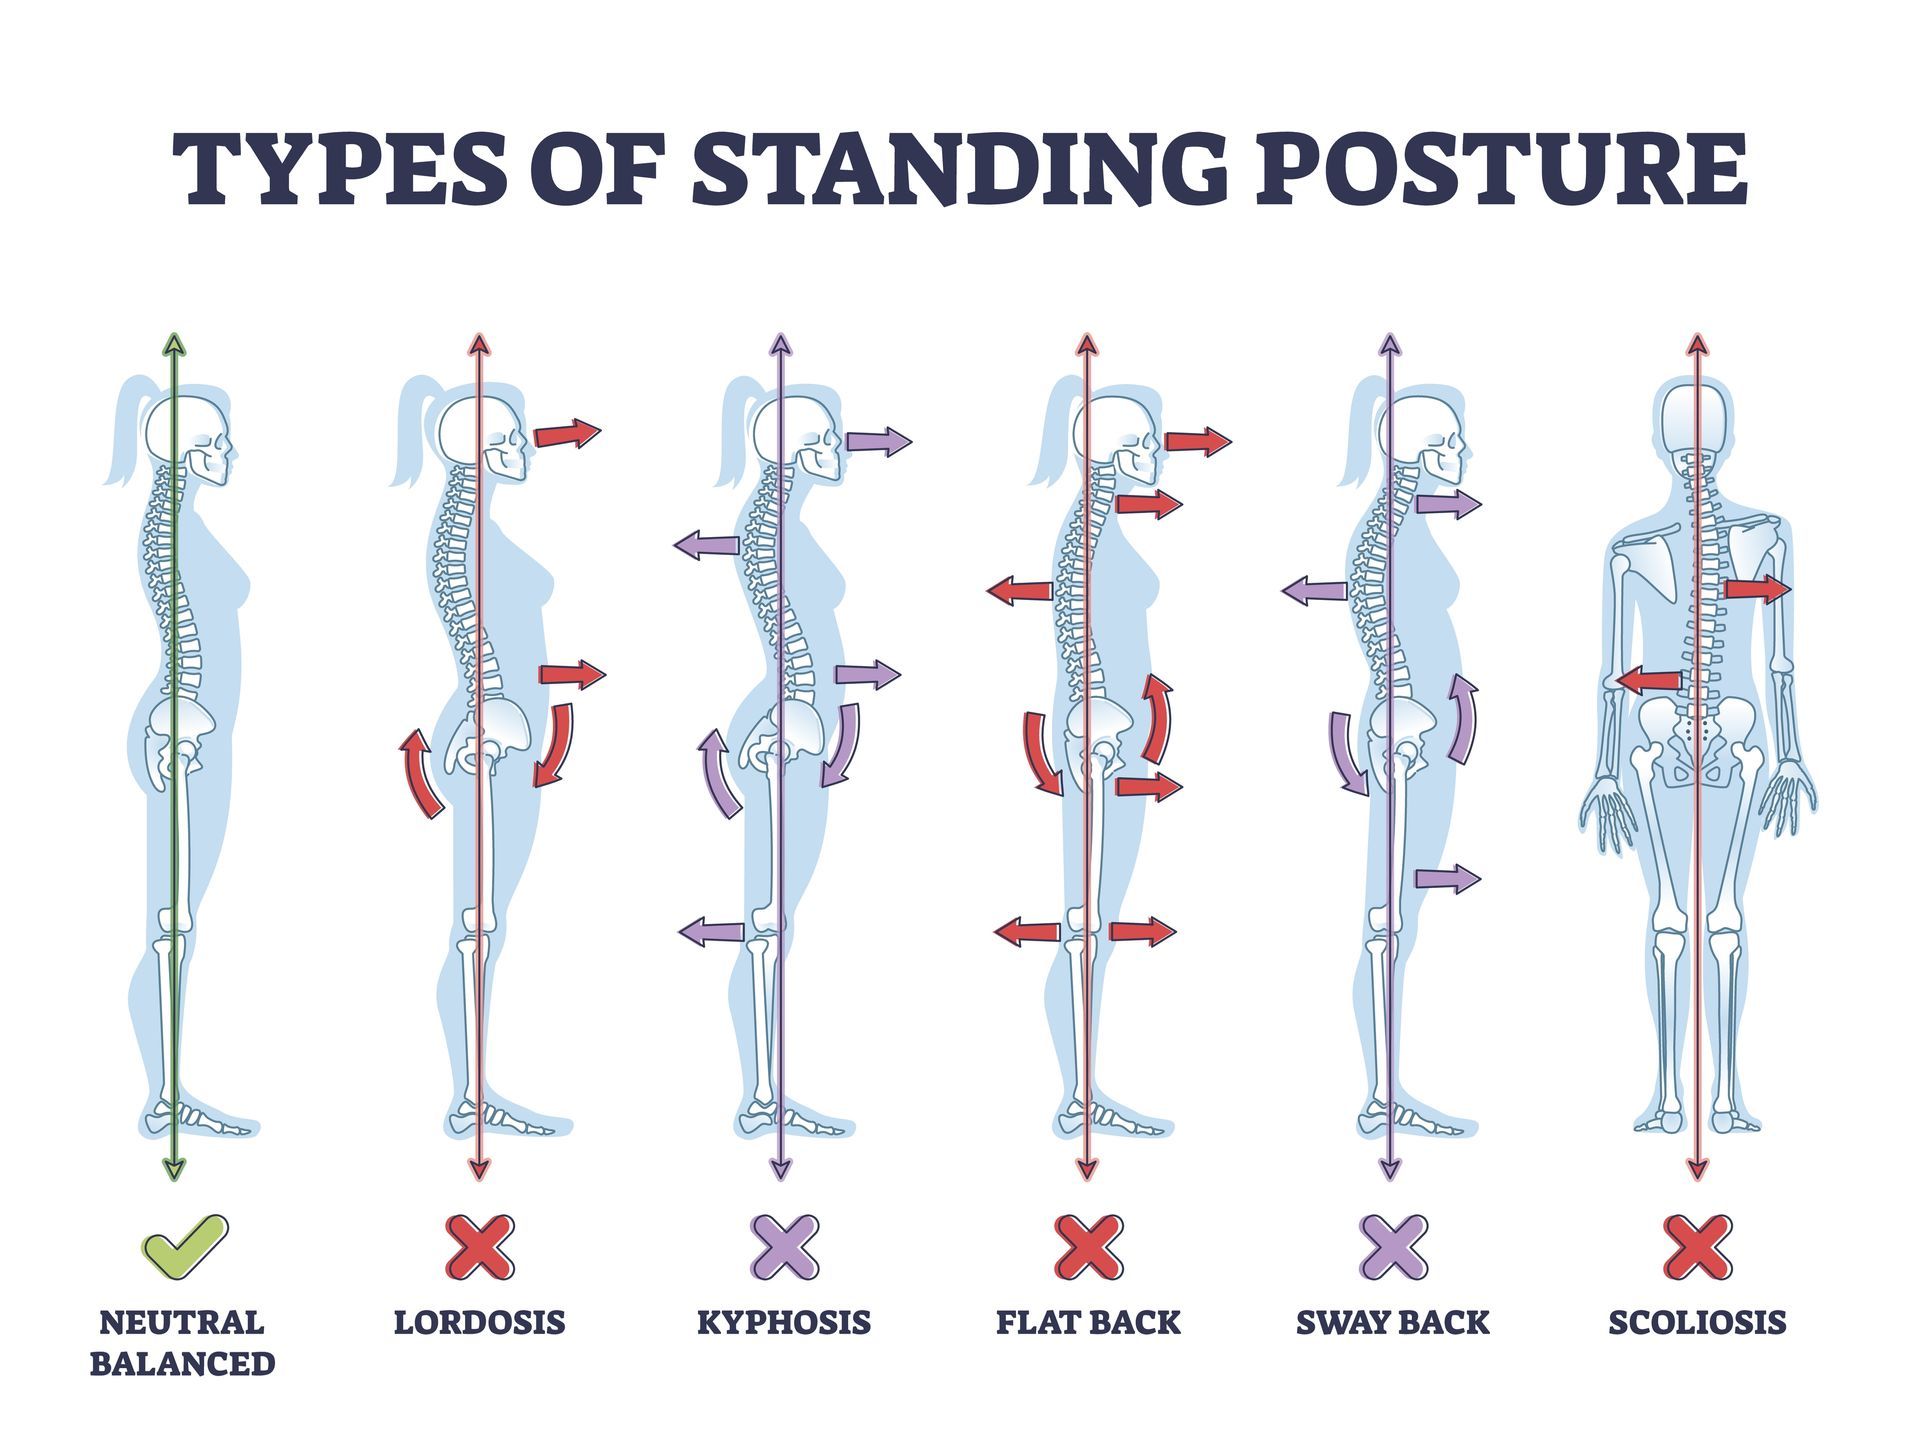 a poster showing the different types of standing posture .